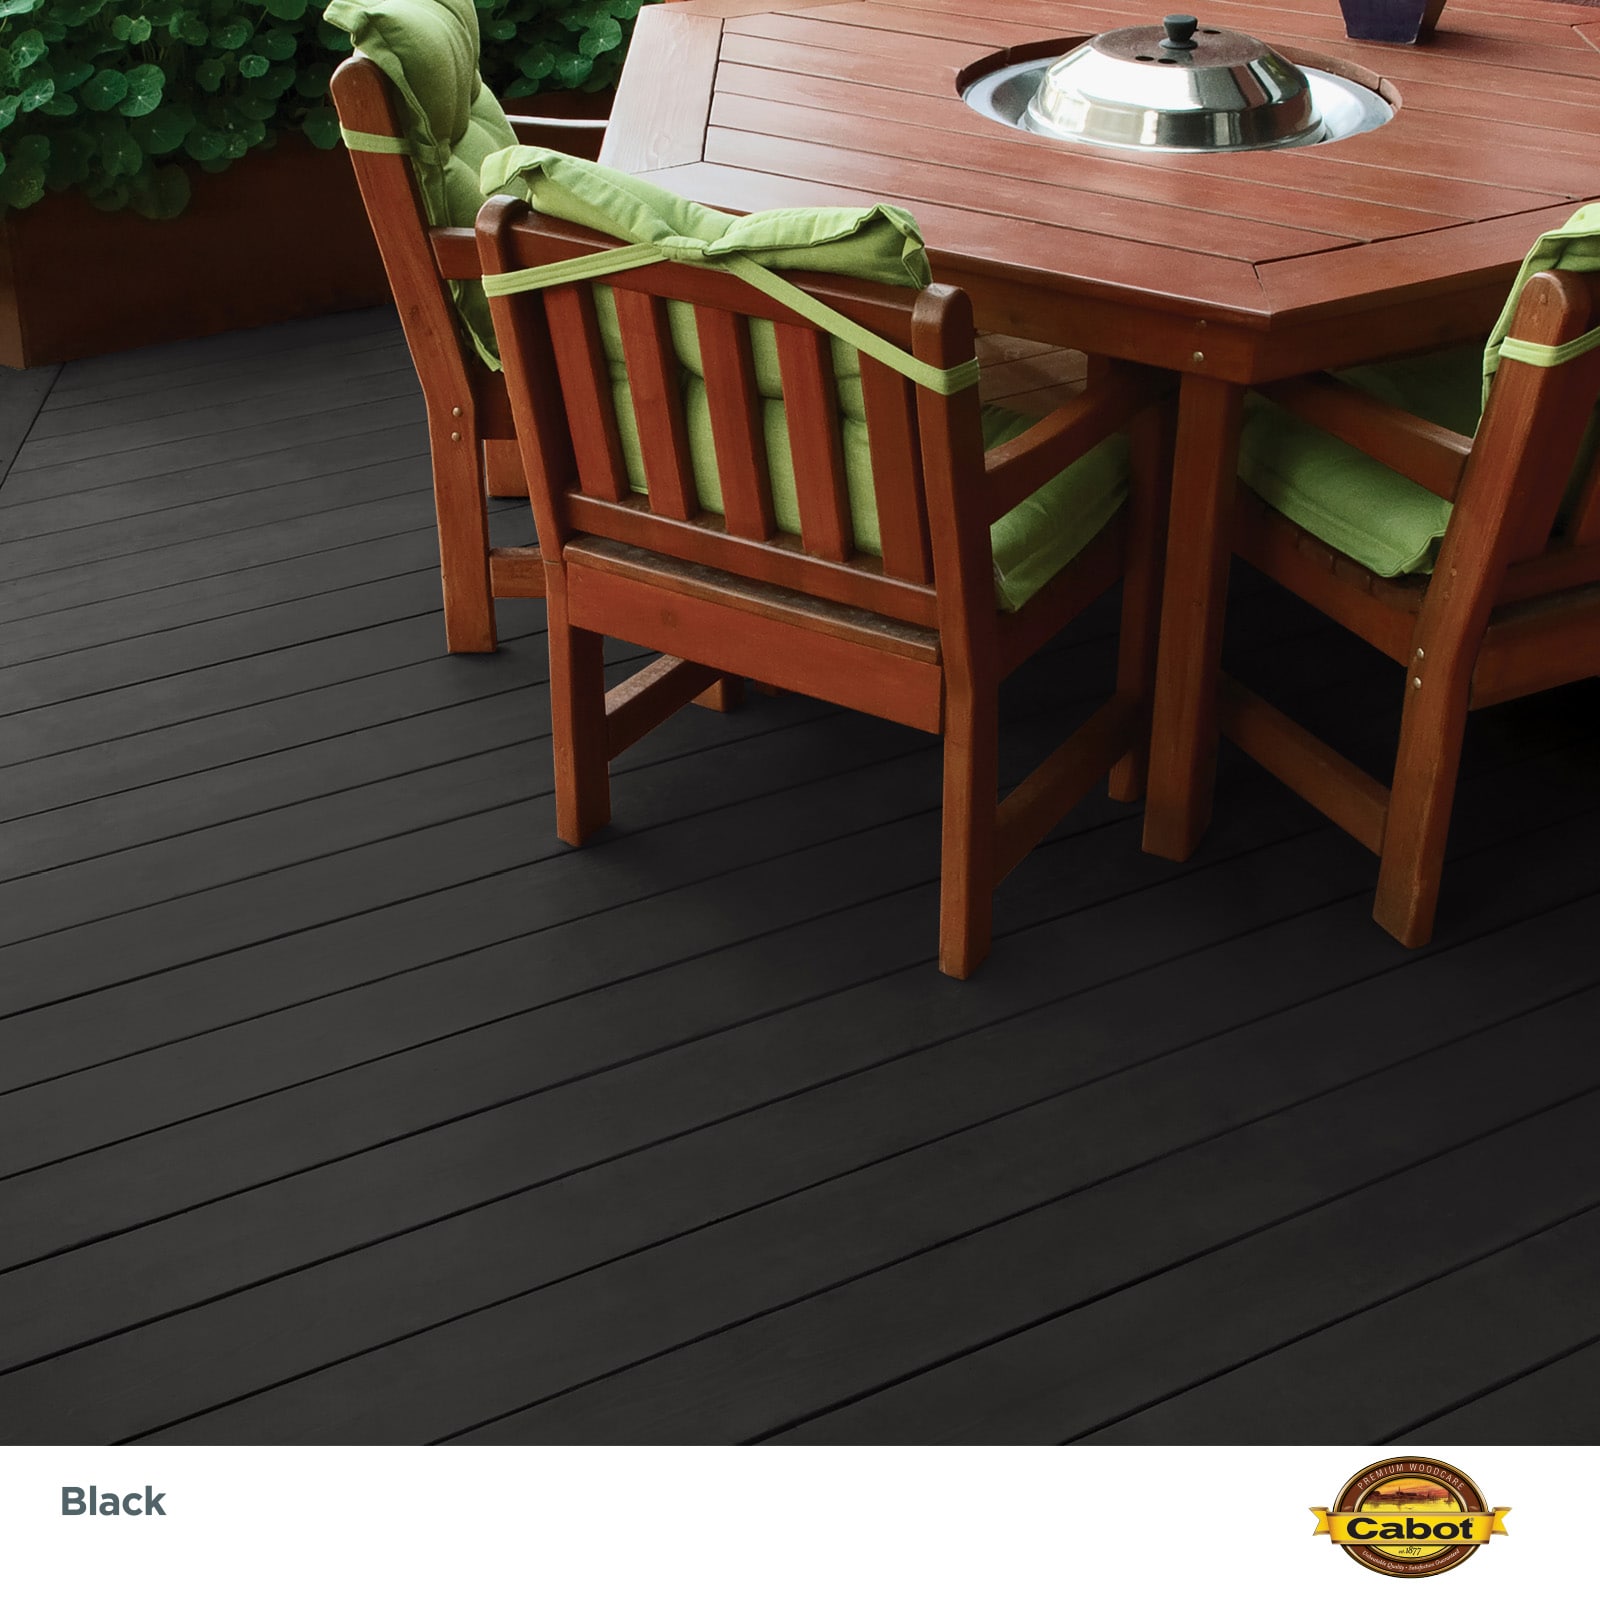 Cabot Black Solid Wood Exterior (1-Gallon) Stains the Sealer Stain in at Exterior department and